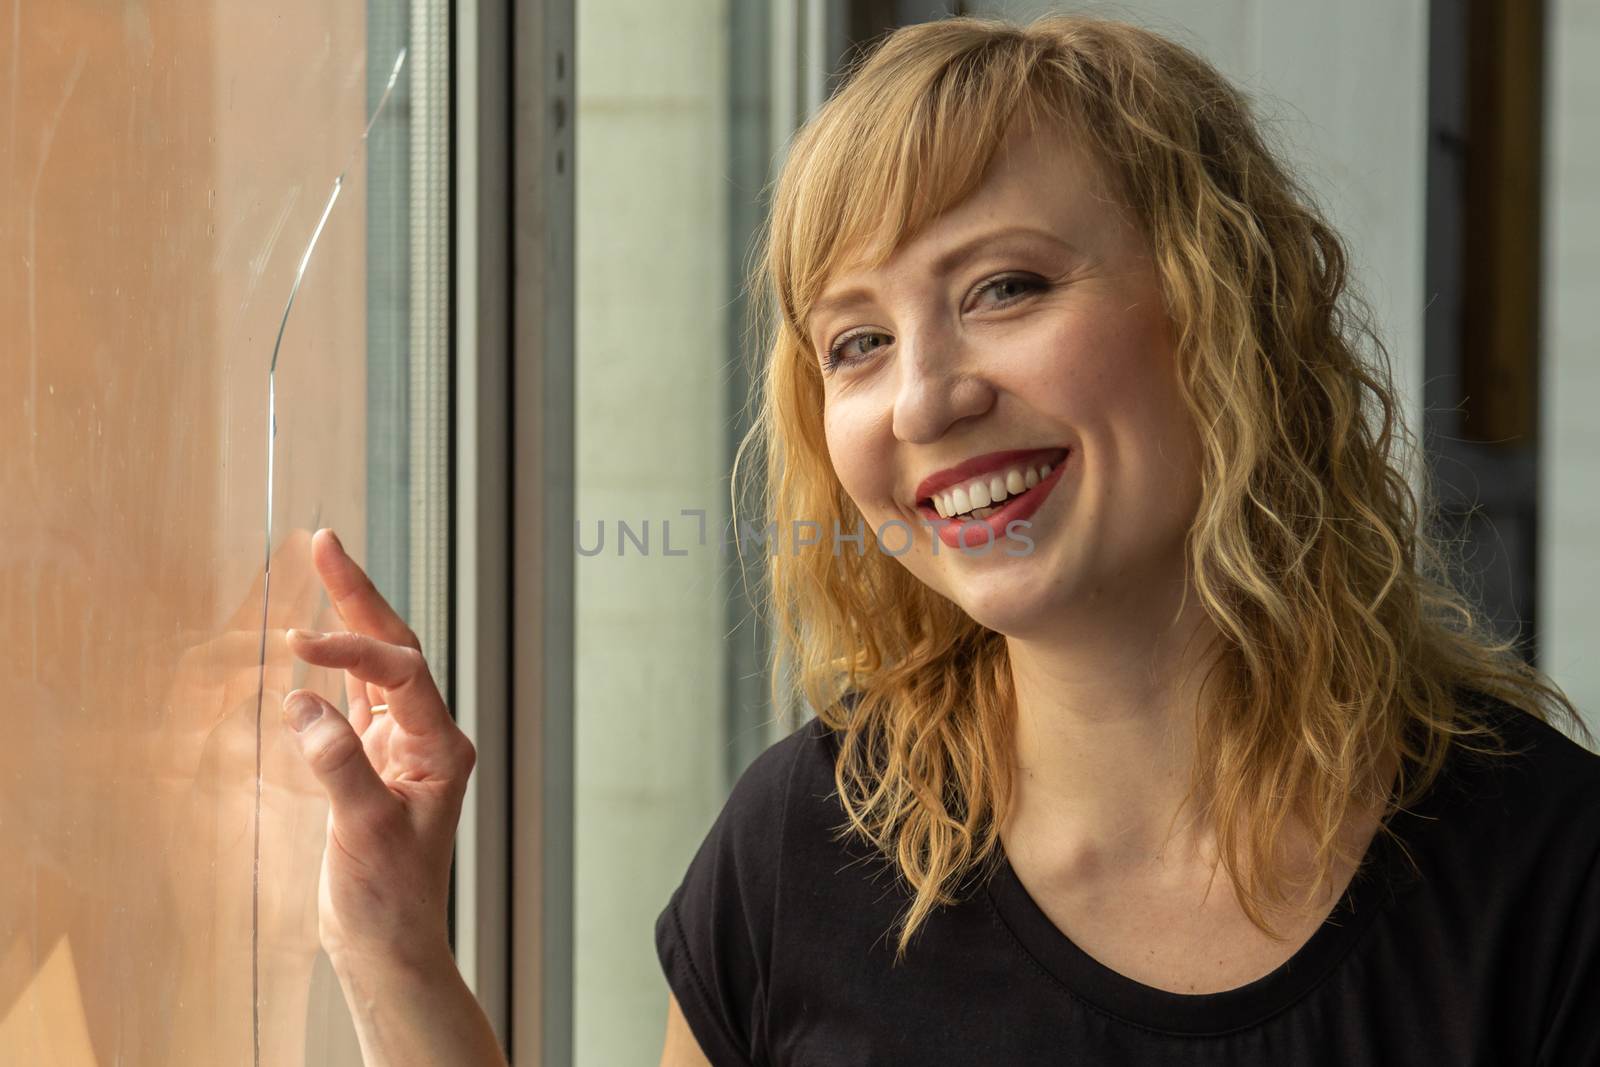 A woman of 30 years with blond hair near the window, you can see her reflection. Close-up